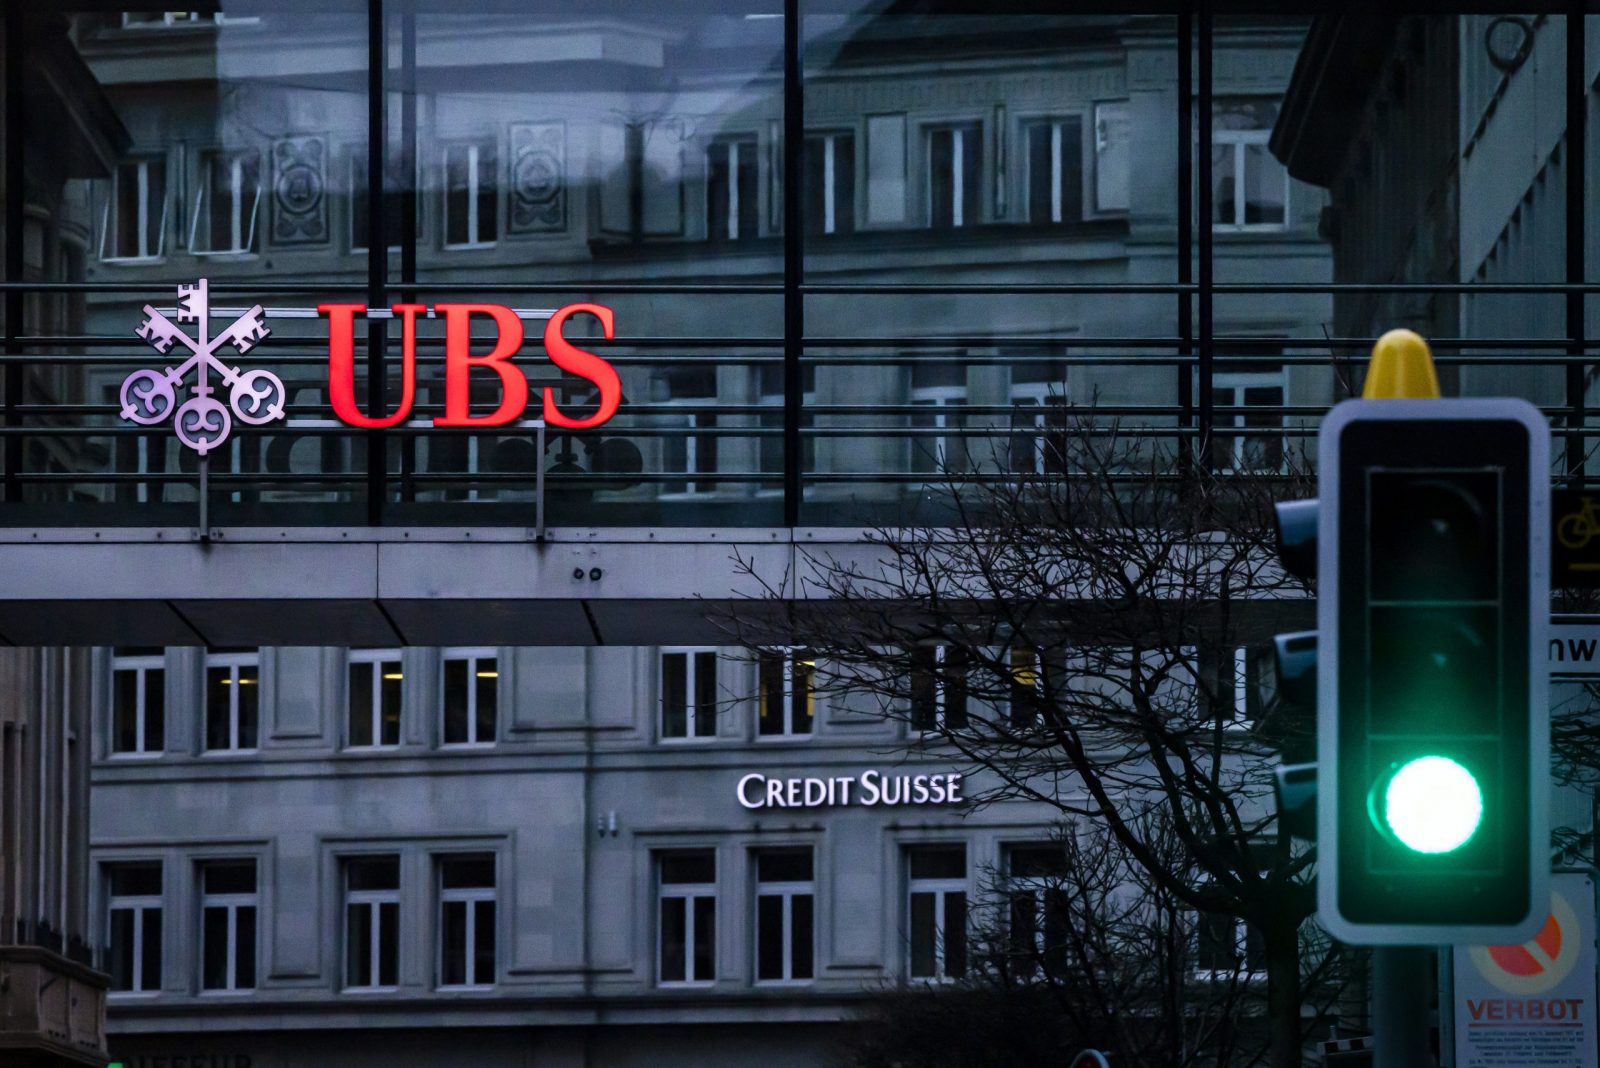 epa10532710 The logos of the Swiss banks Credit Suisse and UBS are displayed on different buildings behind traffic lights in Zurich, Switzerland, 19 March 2023. The bank UBS takes over Credit Suisse for 2 billion US dollars. Shares of Credit Suisse lost more than one-quarter of their value on 15 March 2023, hitting a record low after its biggest shareholder, the Saudi National Bank, told outlets that it would not inject more money into the ailing Swiss bank.  EPA/MICHAEL BUHOLZER